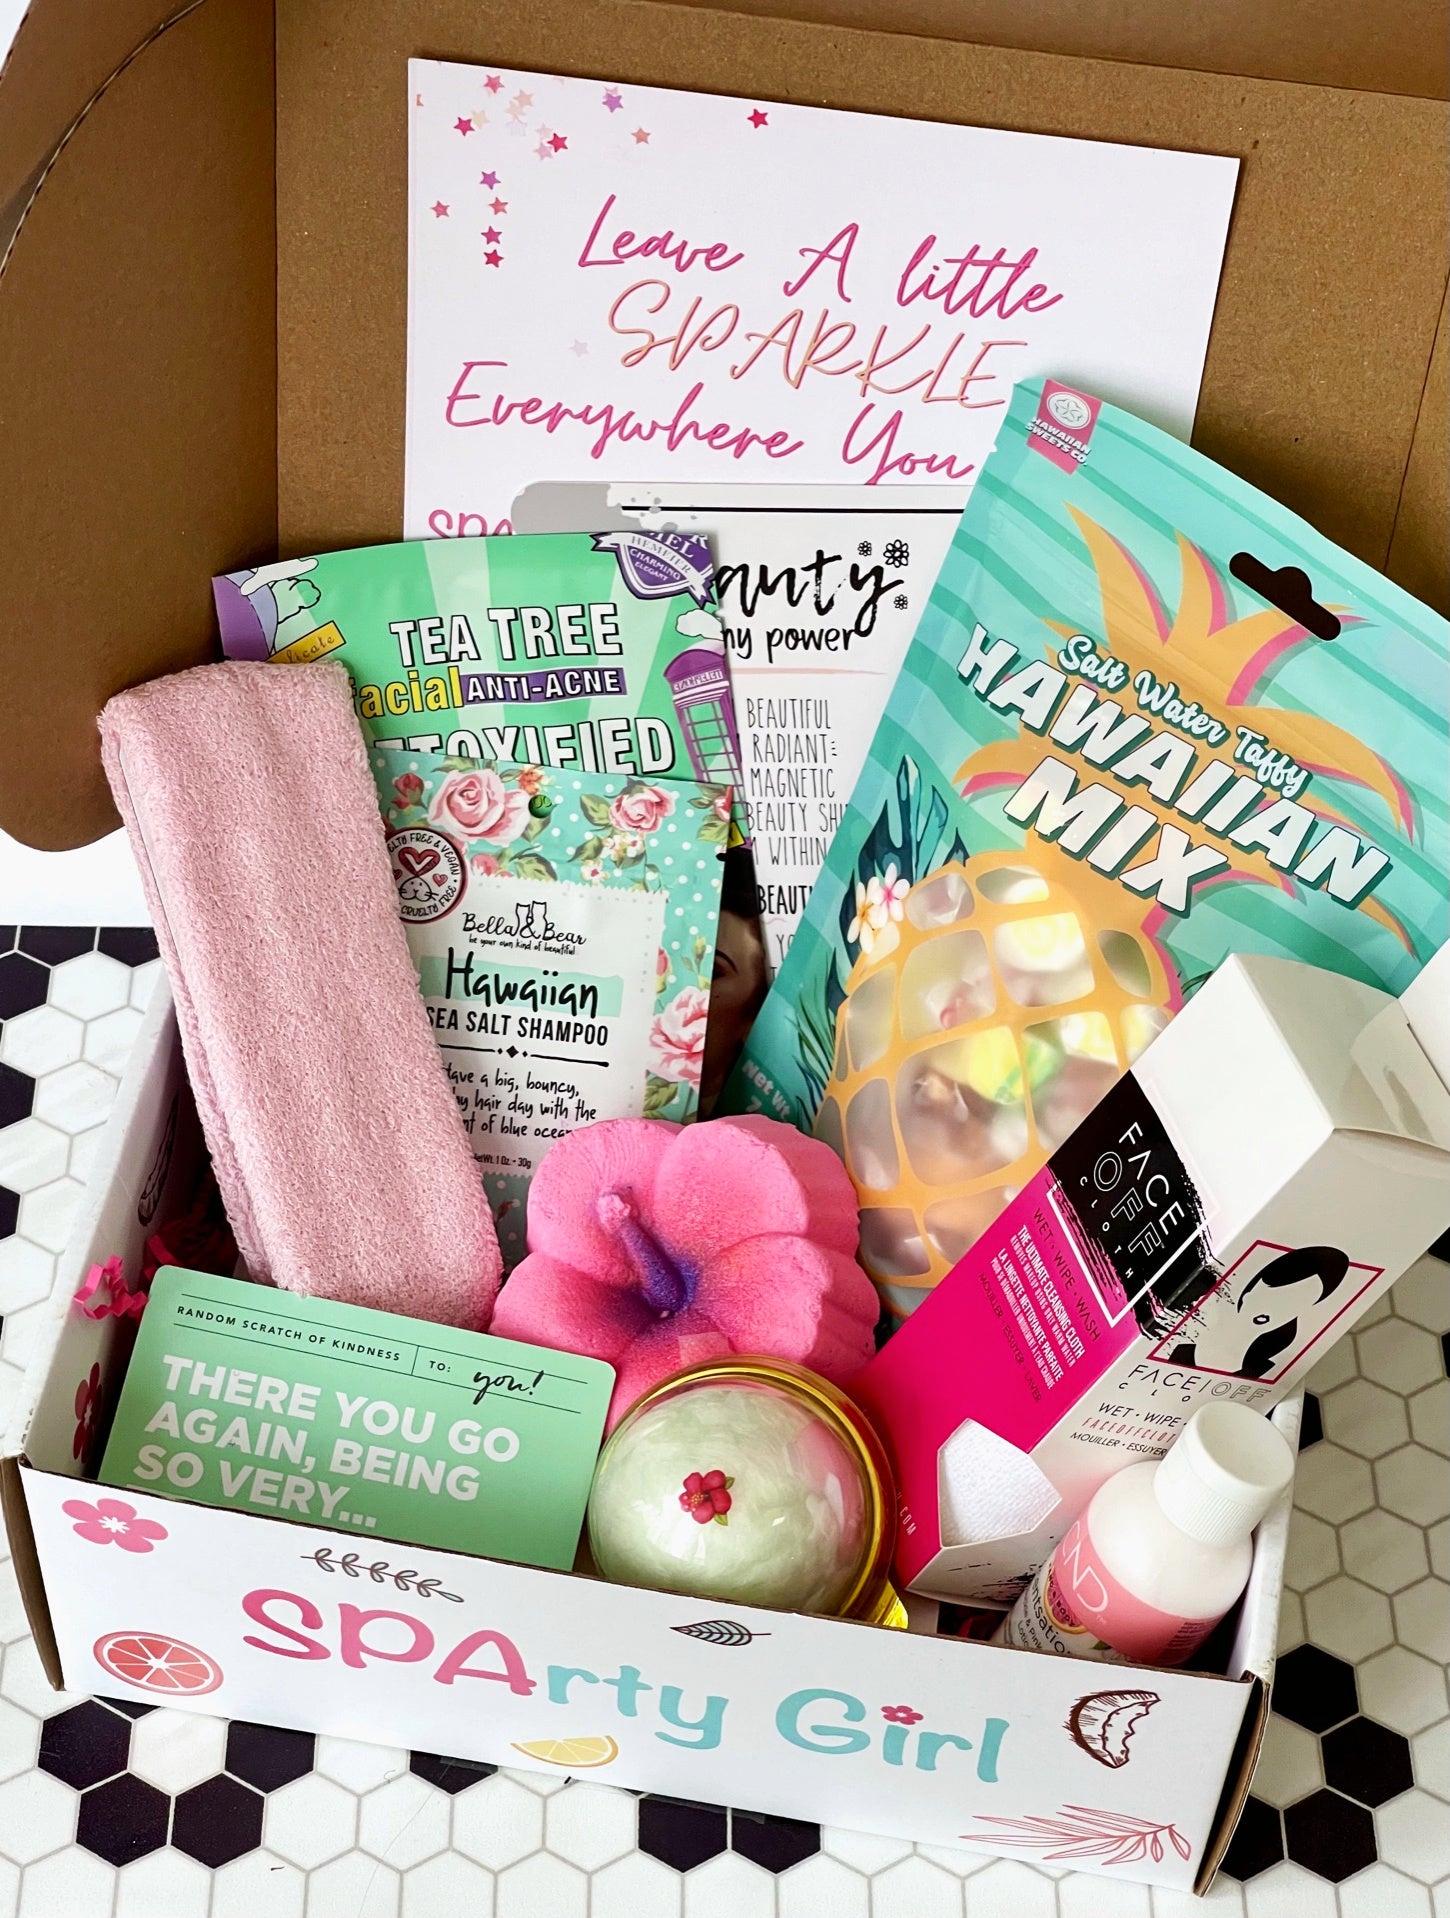 One-Time Tween Box - Sparty Girl